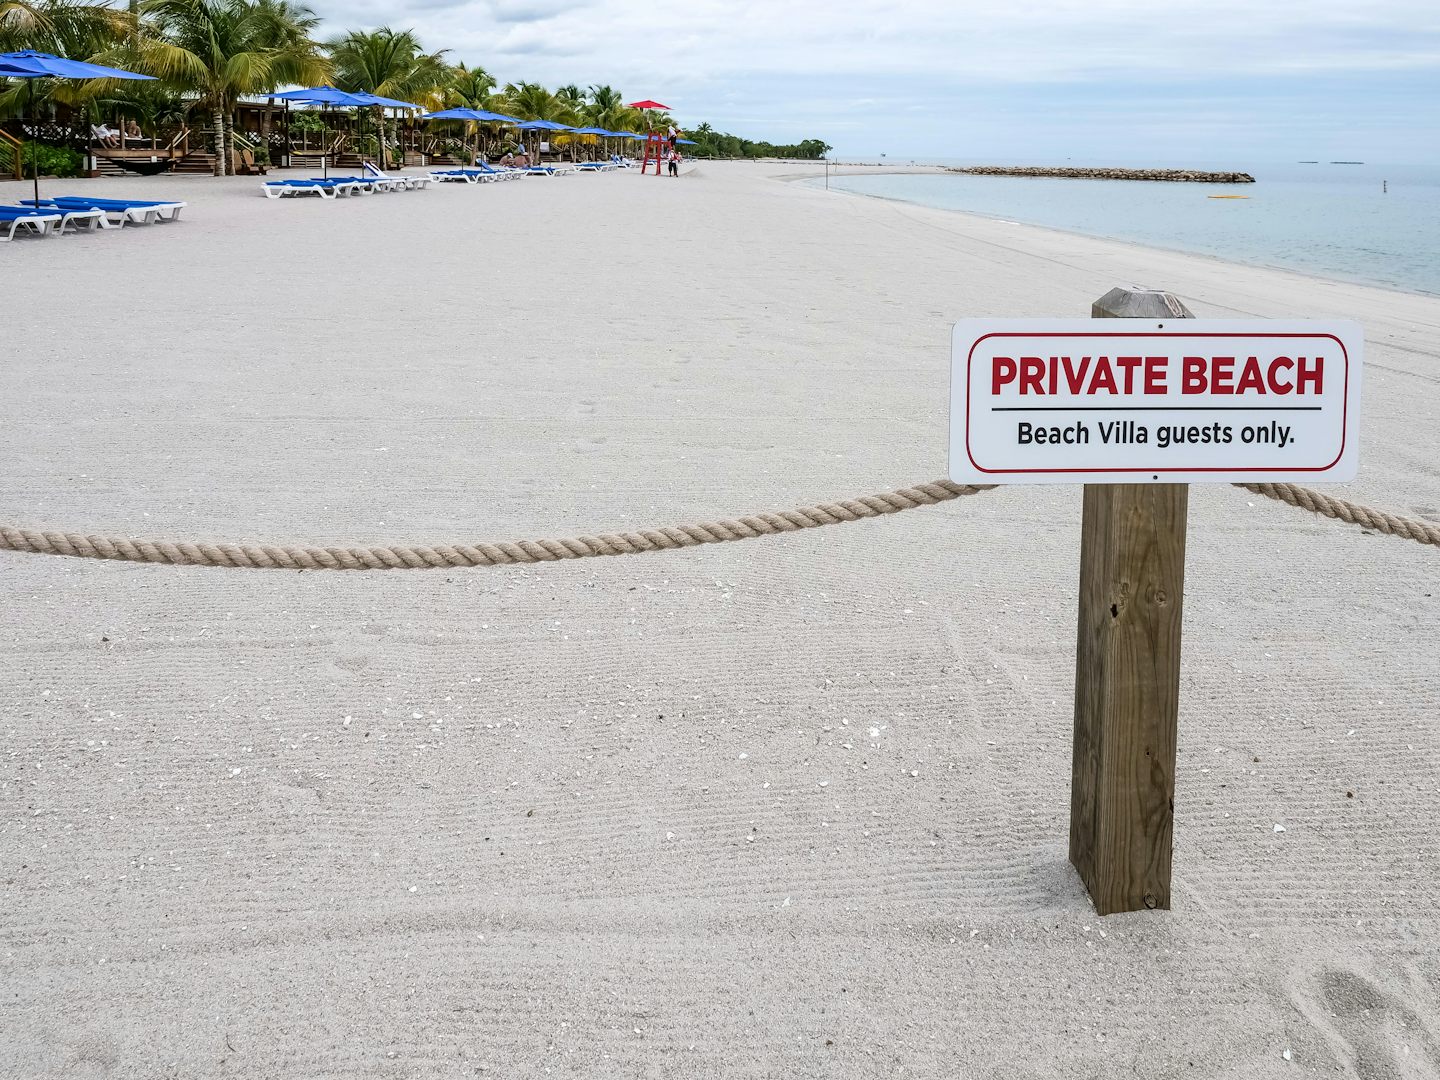 Harvest Caye. A private beach in the 21century?